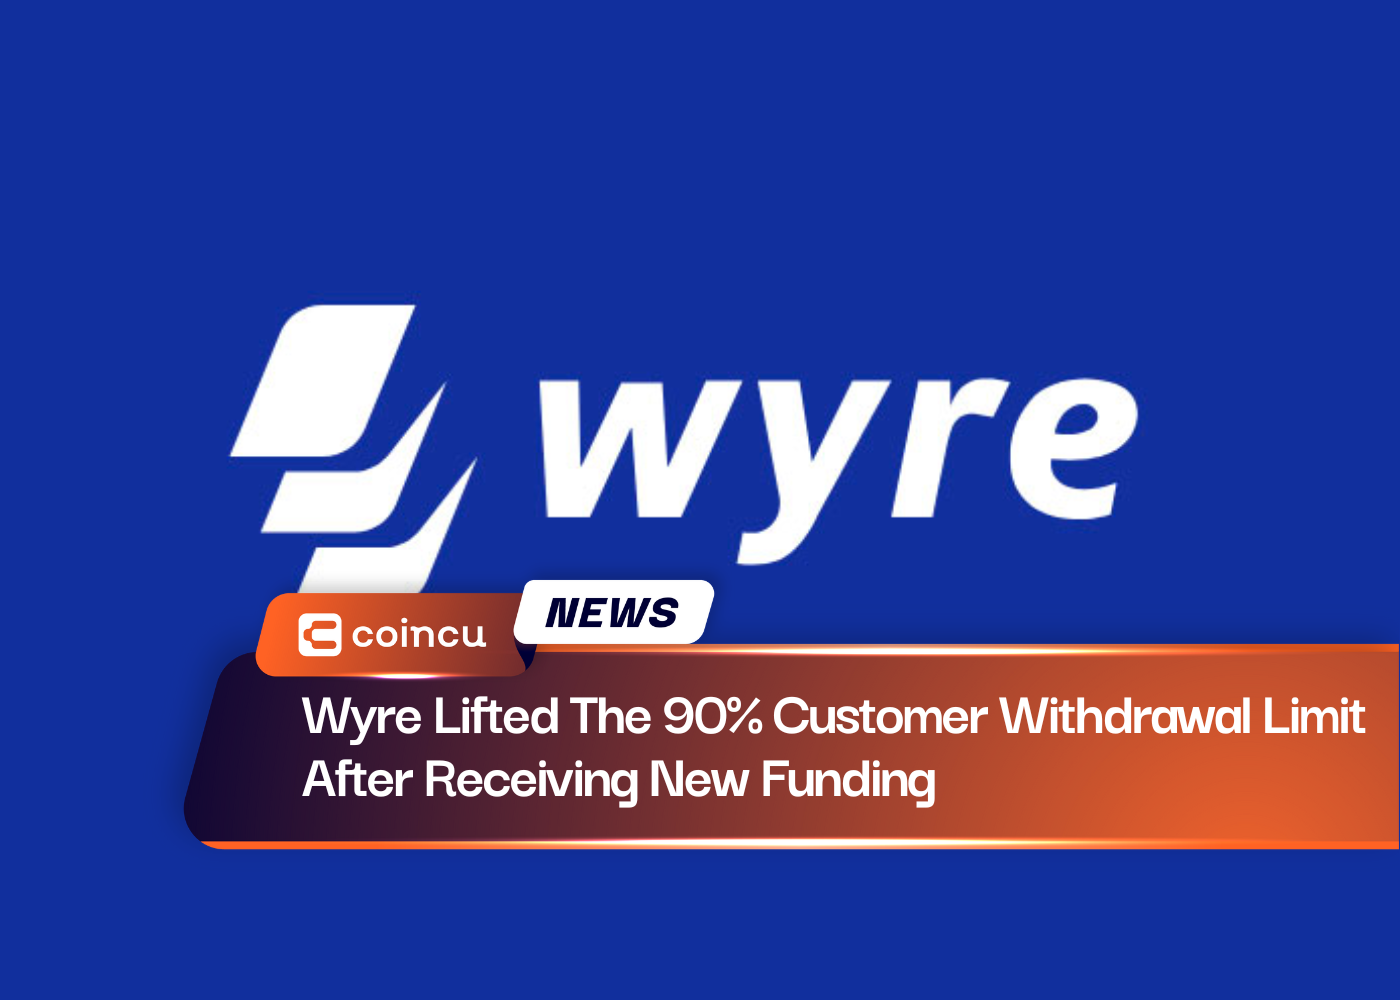 Wyre Lifted The 90% Customer Withdrawal Limit After Receiving New Funding